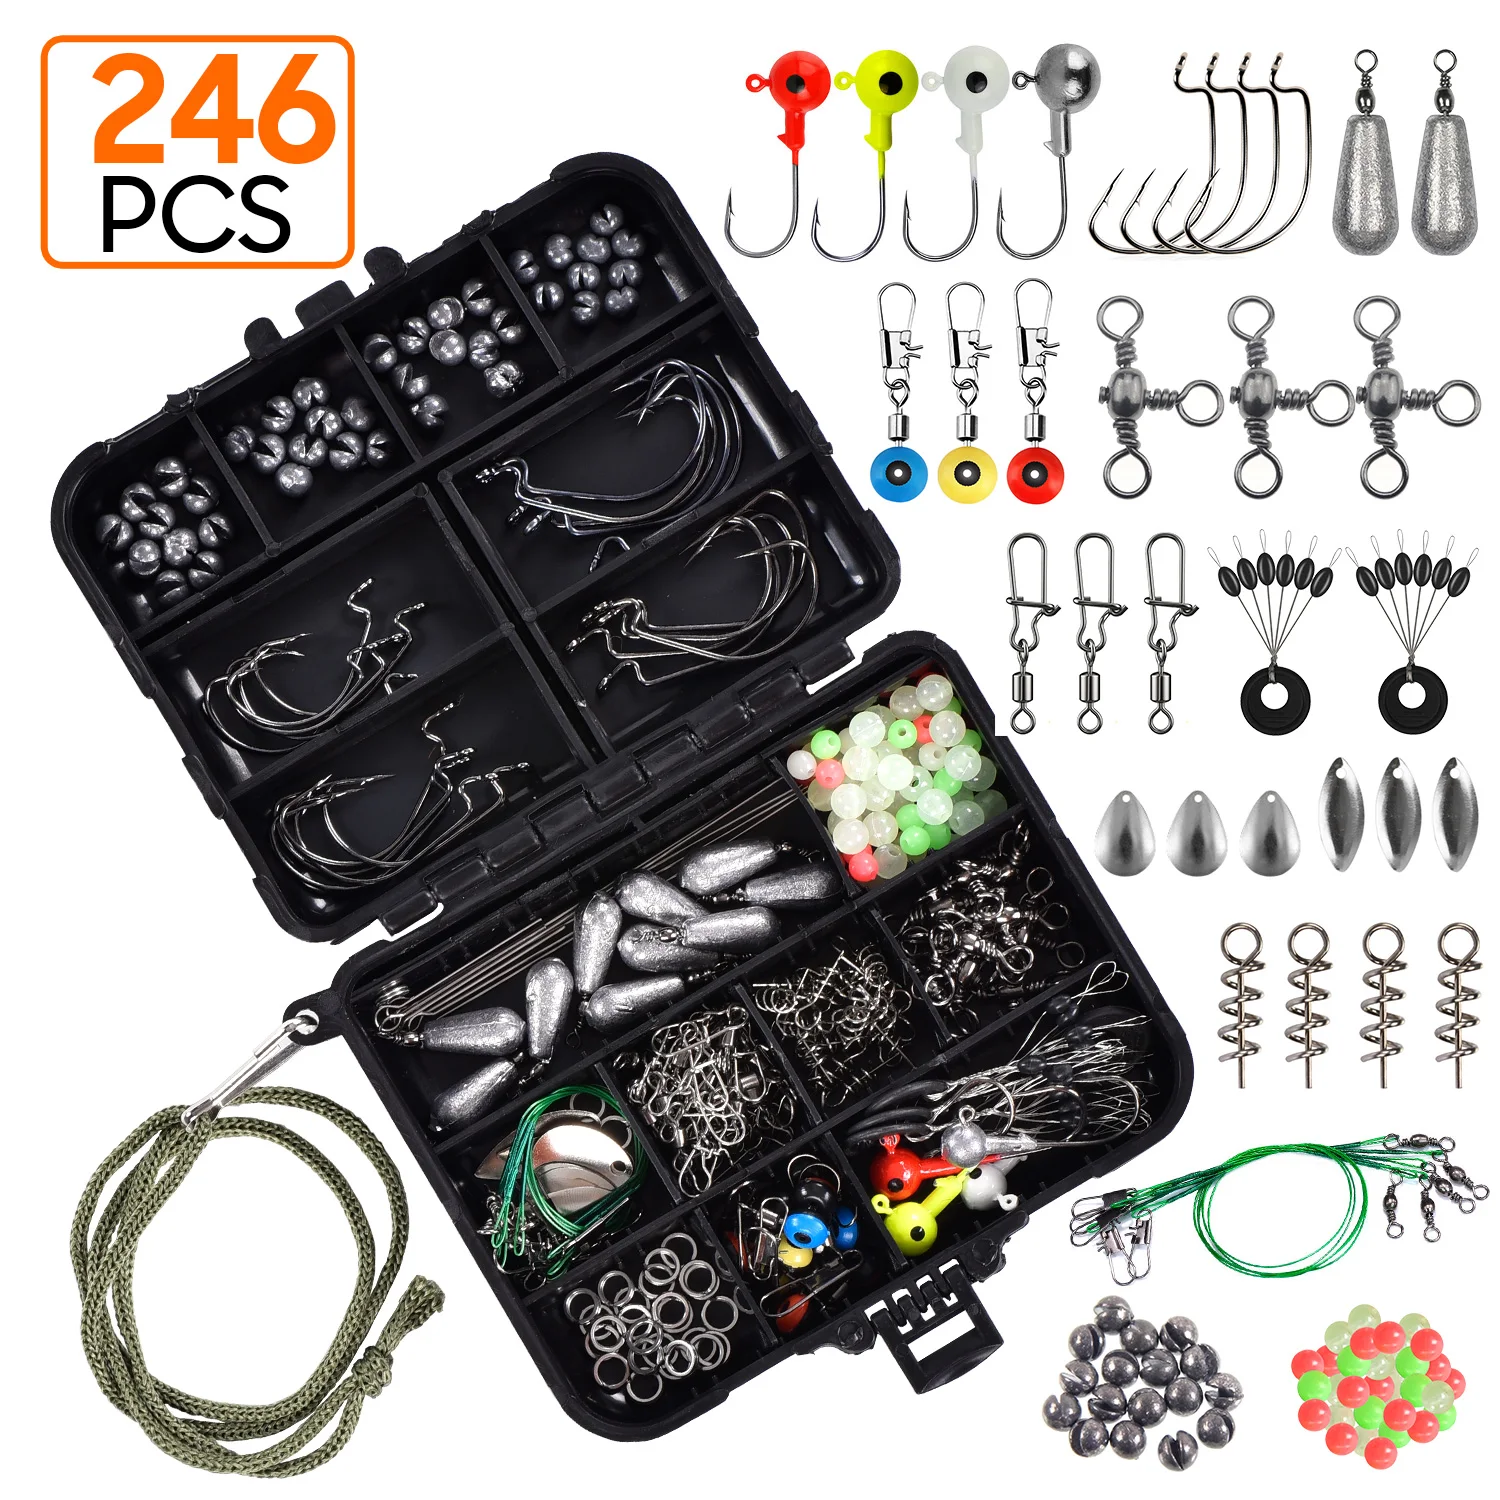 

246pcs/box Fishing Tackles Box Accessories Kit Set With Hooks Snap Sinker Weight For Carp Bait Lure Ice Winter Accessoires, Black